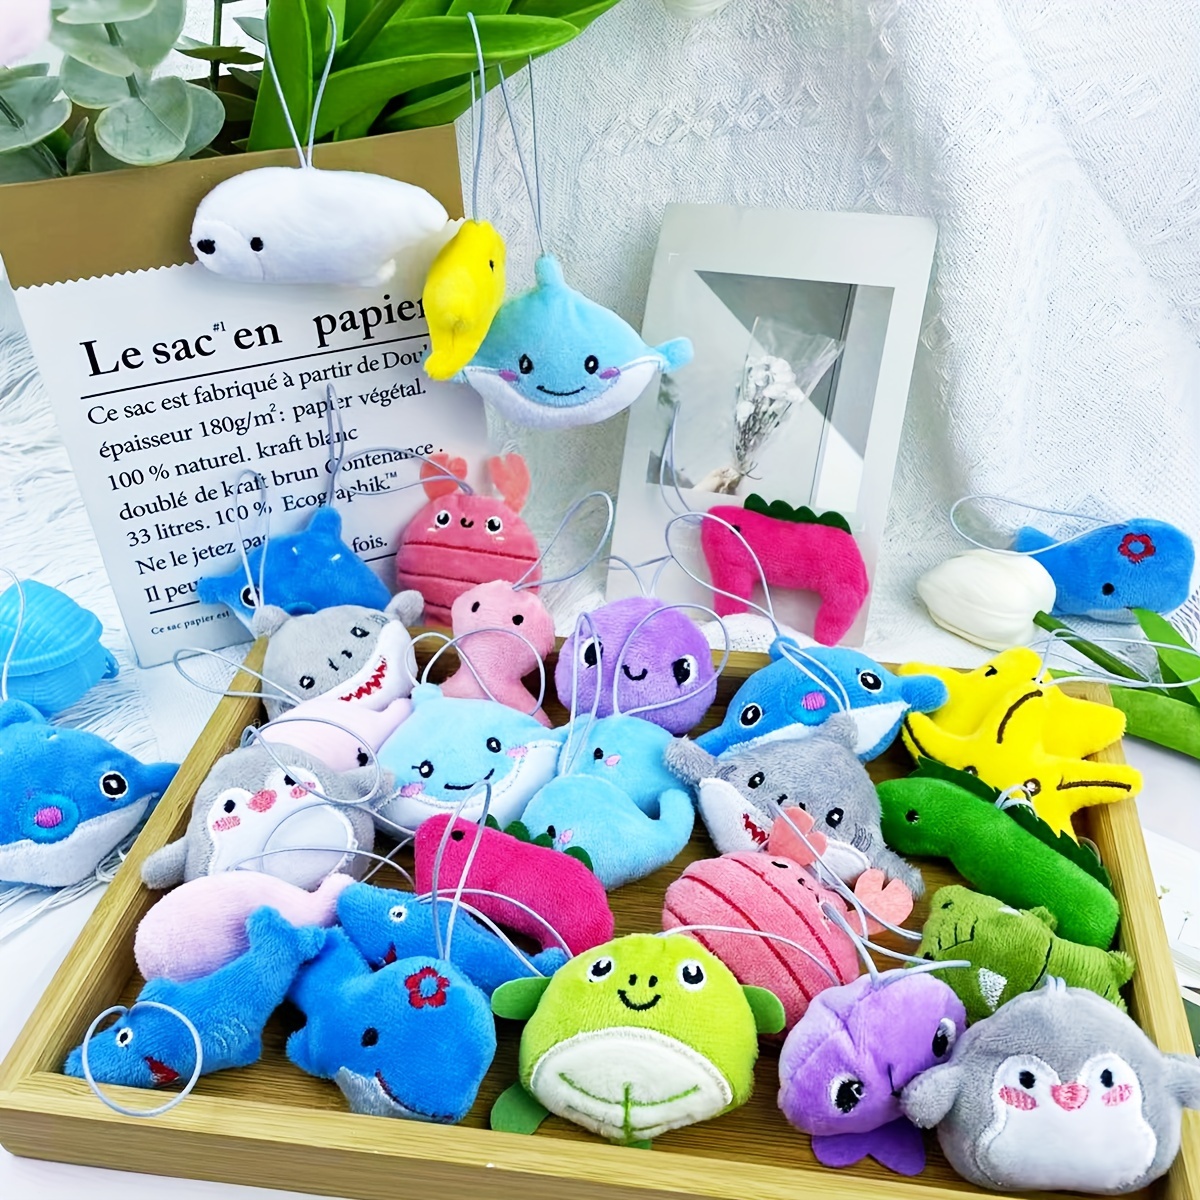 

12 Mini Ocean Animals Plush Toys Set Cute Small Marine Life Stuffed Toys Party Favors Key Chain Easter Egg Filler Carnival Birthday Party Keychain Decoration